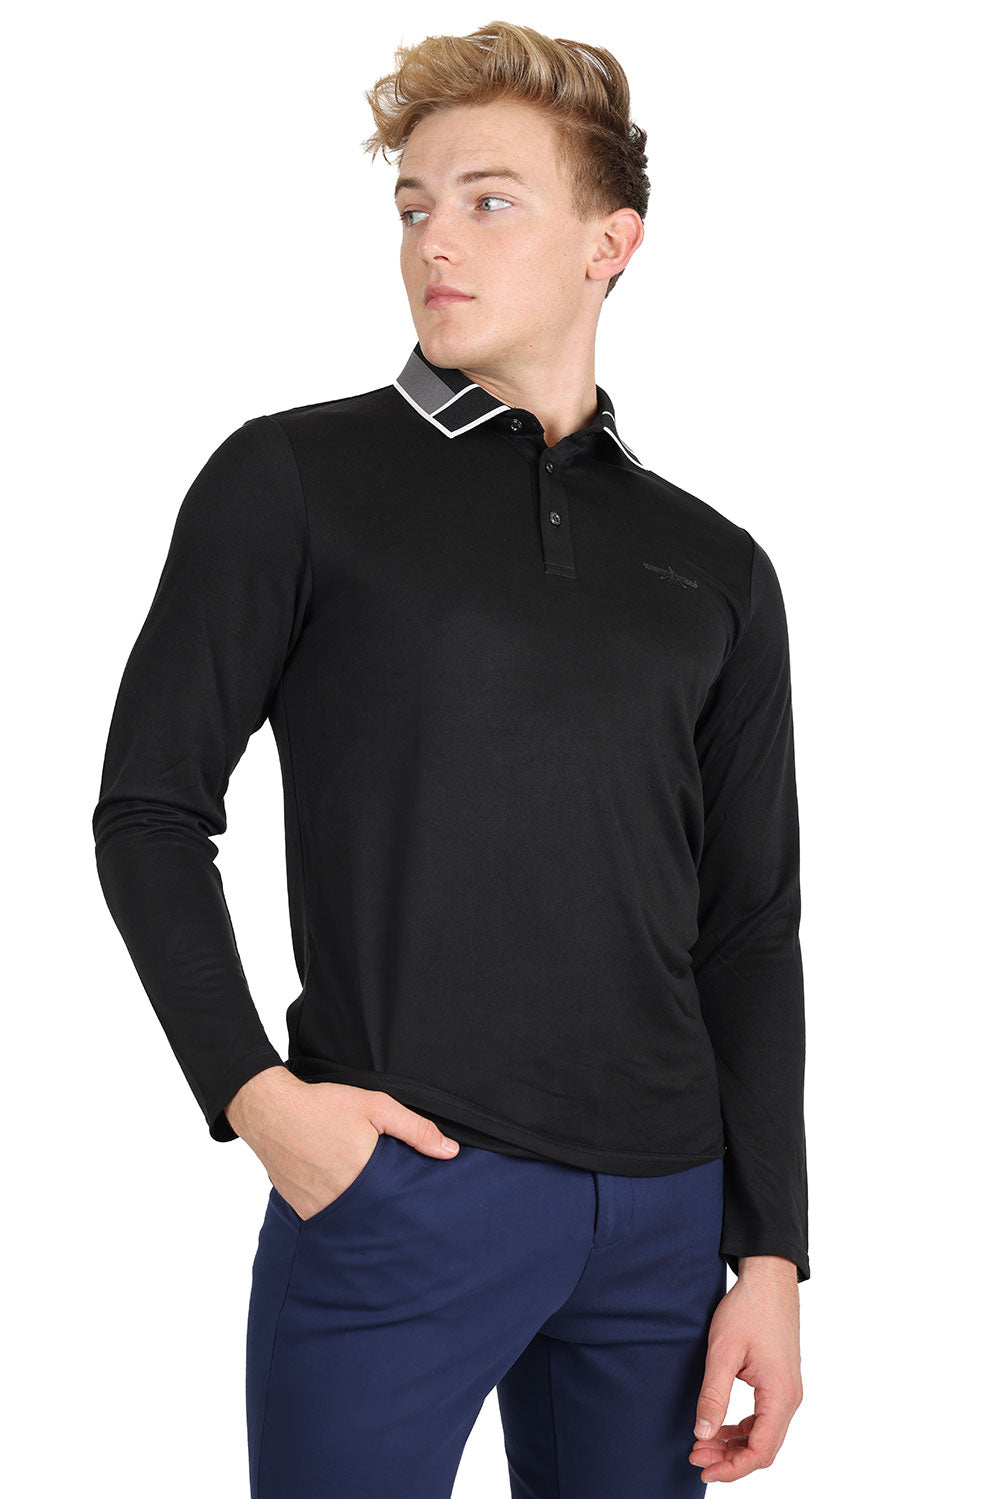 Barabas Men's Solid Color Luxury Long Sleeves Polo Shirts 2LPL2000 Black